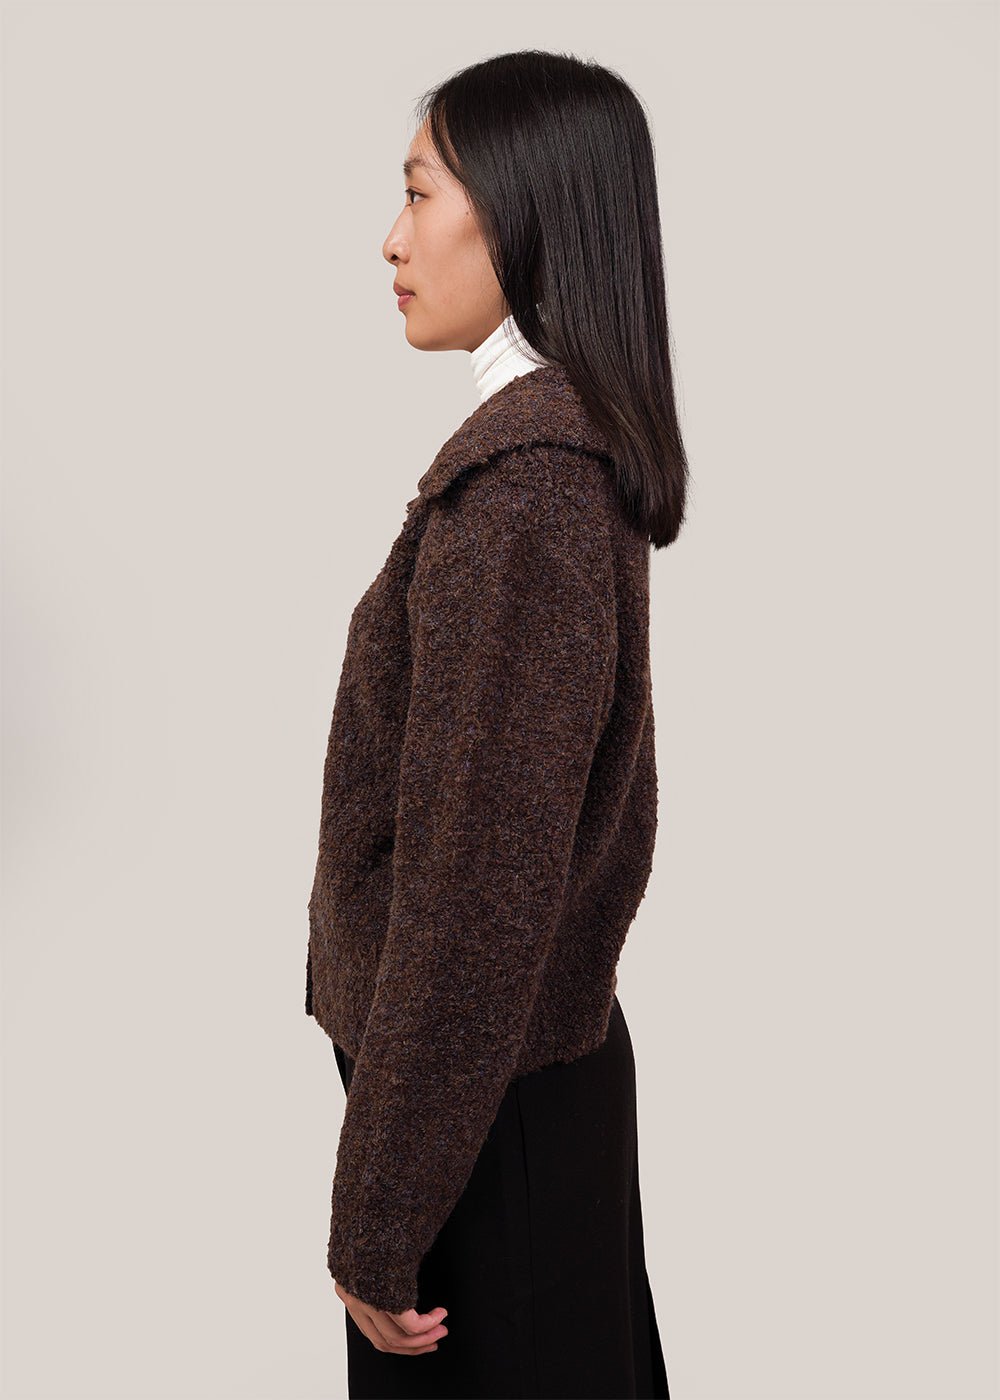 Spread Collar Boucle Cardigan in Brown by MIJEONG PARK – New